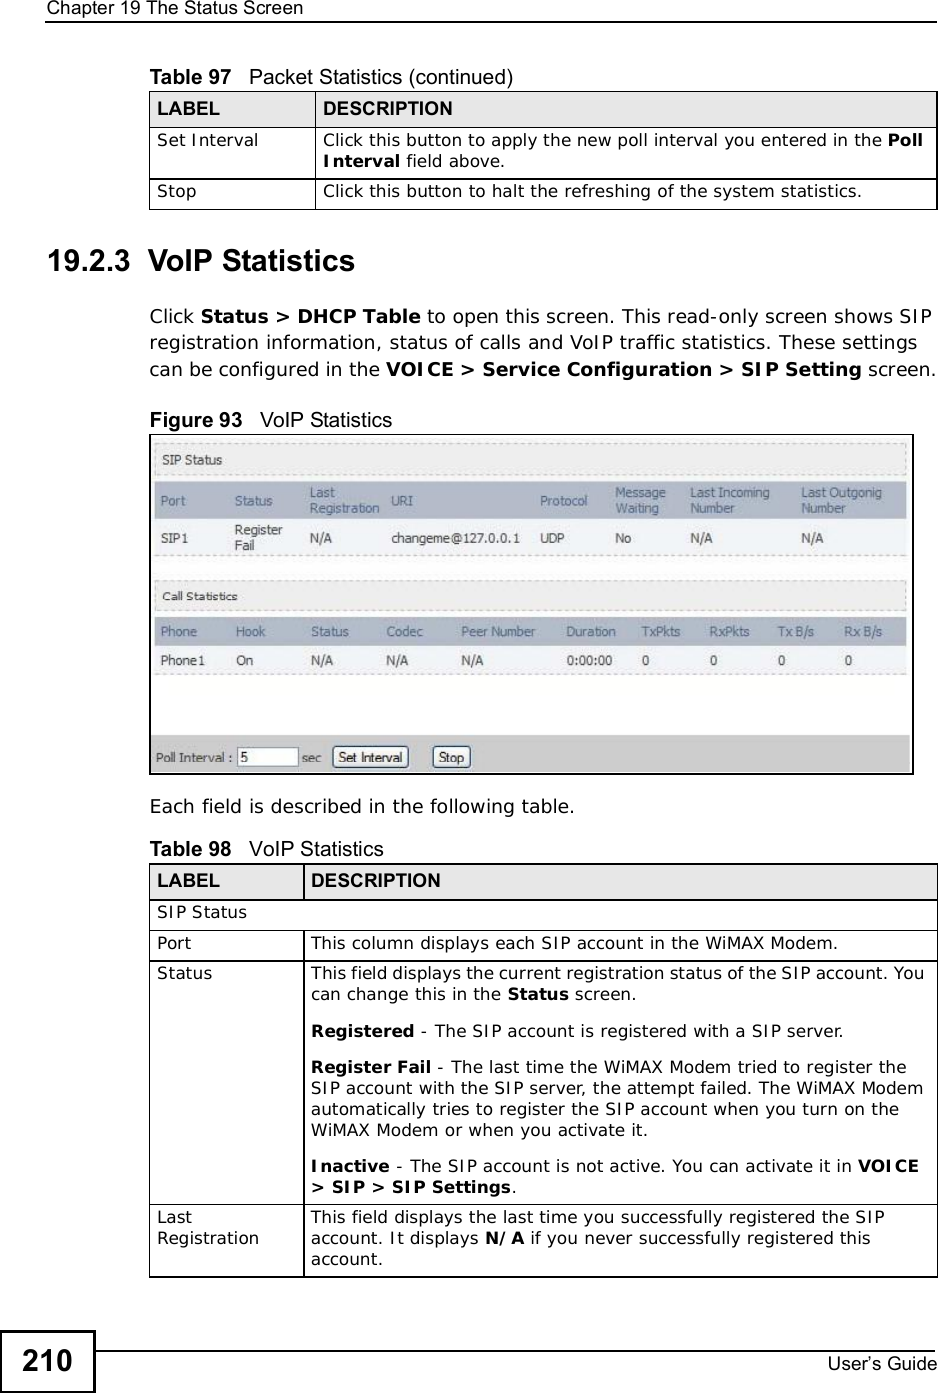 Chapter 19The Status ScreenUser s Guide21019.2.3  VoIP StatisticsClick Status &gt; DHCP Table to open this screen. This read-only screen shows SIP registration information, status of calls and VoIP traffic statistics. These settings can be configured in the VOICE &gt; Service Configuration &gt; SIP Setting screen.Figure 93   VoIP StatisticsEach field is described in the following table.Set Interval Click this button to apply the new poll interval you entered in the PollInterval field above.Stop Click this button to halt the refreshing of the system statistics.Table 97   Packet Statistics (continued)LABEL DESCRIPTIONTable 98   VoIP Statistics LABEL DESCRIPTIONSIP StatusPortThis column displays each SIP account in the WiMAX Modem.StatusThis field displays the current registration status of the SIP account. You can change this in the Status screen.Registered - The SIP account is registered with a SIP server.Register Fail - The last time the WiMAX Modem tried to register the SIP account with the SIP server, the attempt failed. The WiMAX Modem automatically tries to register the SIP account when you turn on the WiMAX Modem or when you activate it.Inactive - The SIP account is not active. You can activate it in VOICE &gt; SIP &gt; SIP Settings.LastRegistration This field displays the last time you successfully registered the SIP account. It displays N/A if you never successfully registered this account.